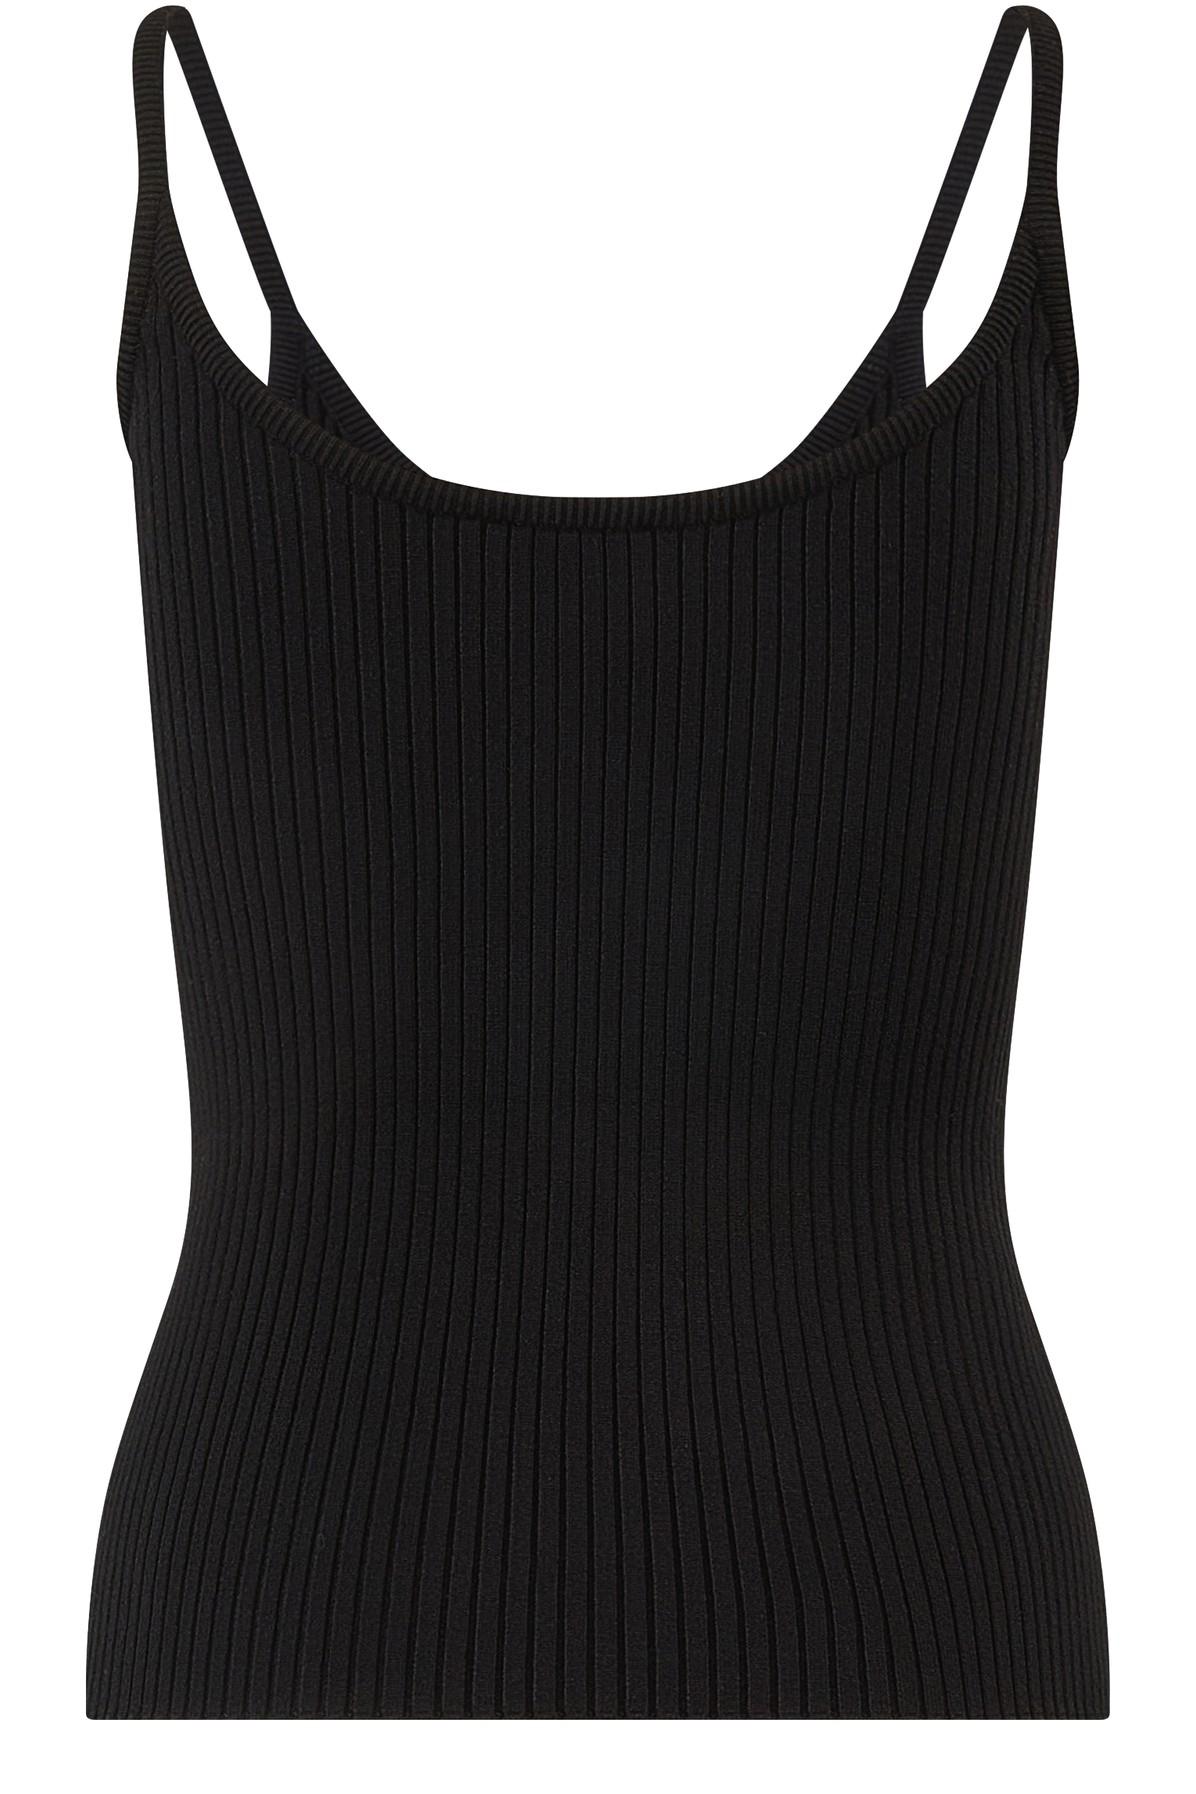 Courreges Synthetic Knit Tank Top in Black | Lyst